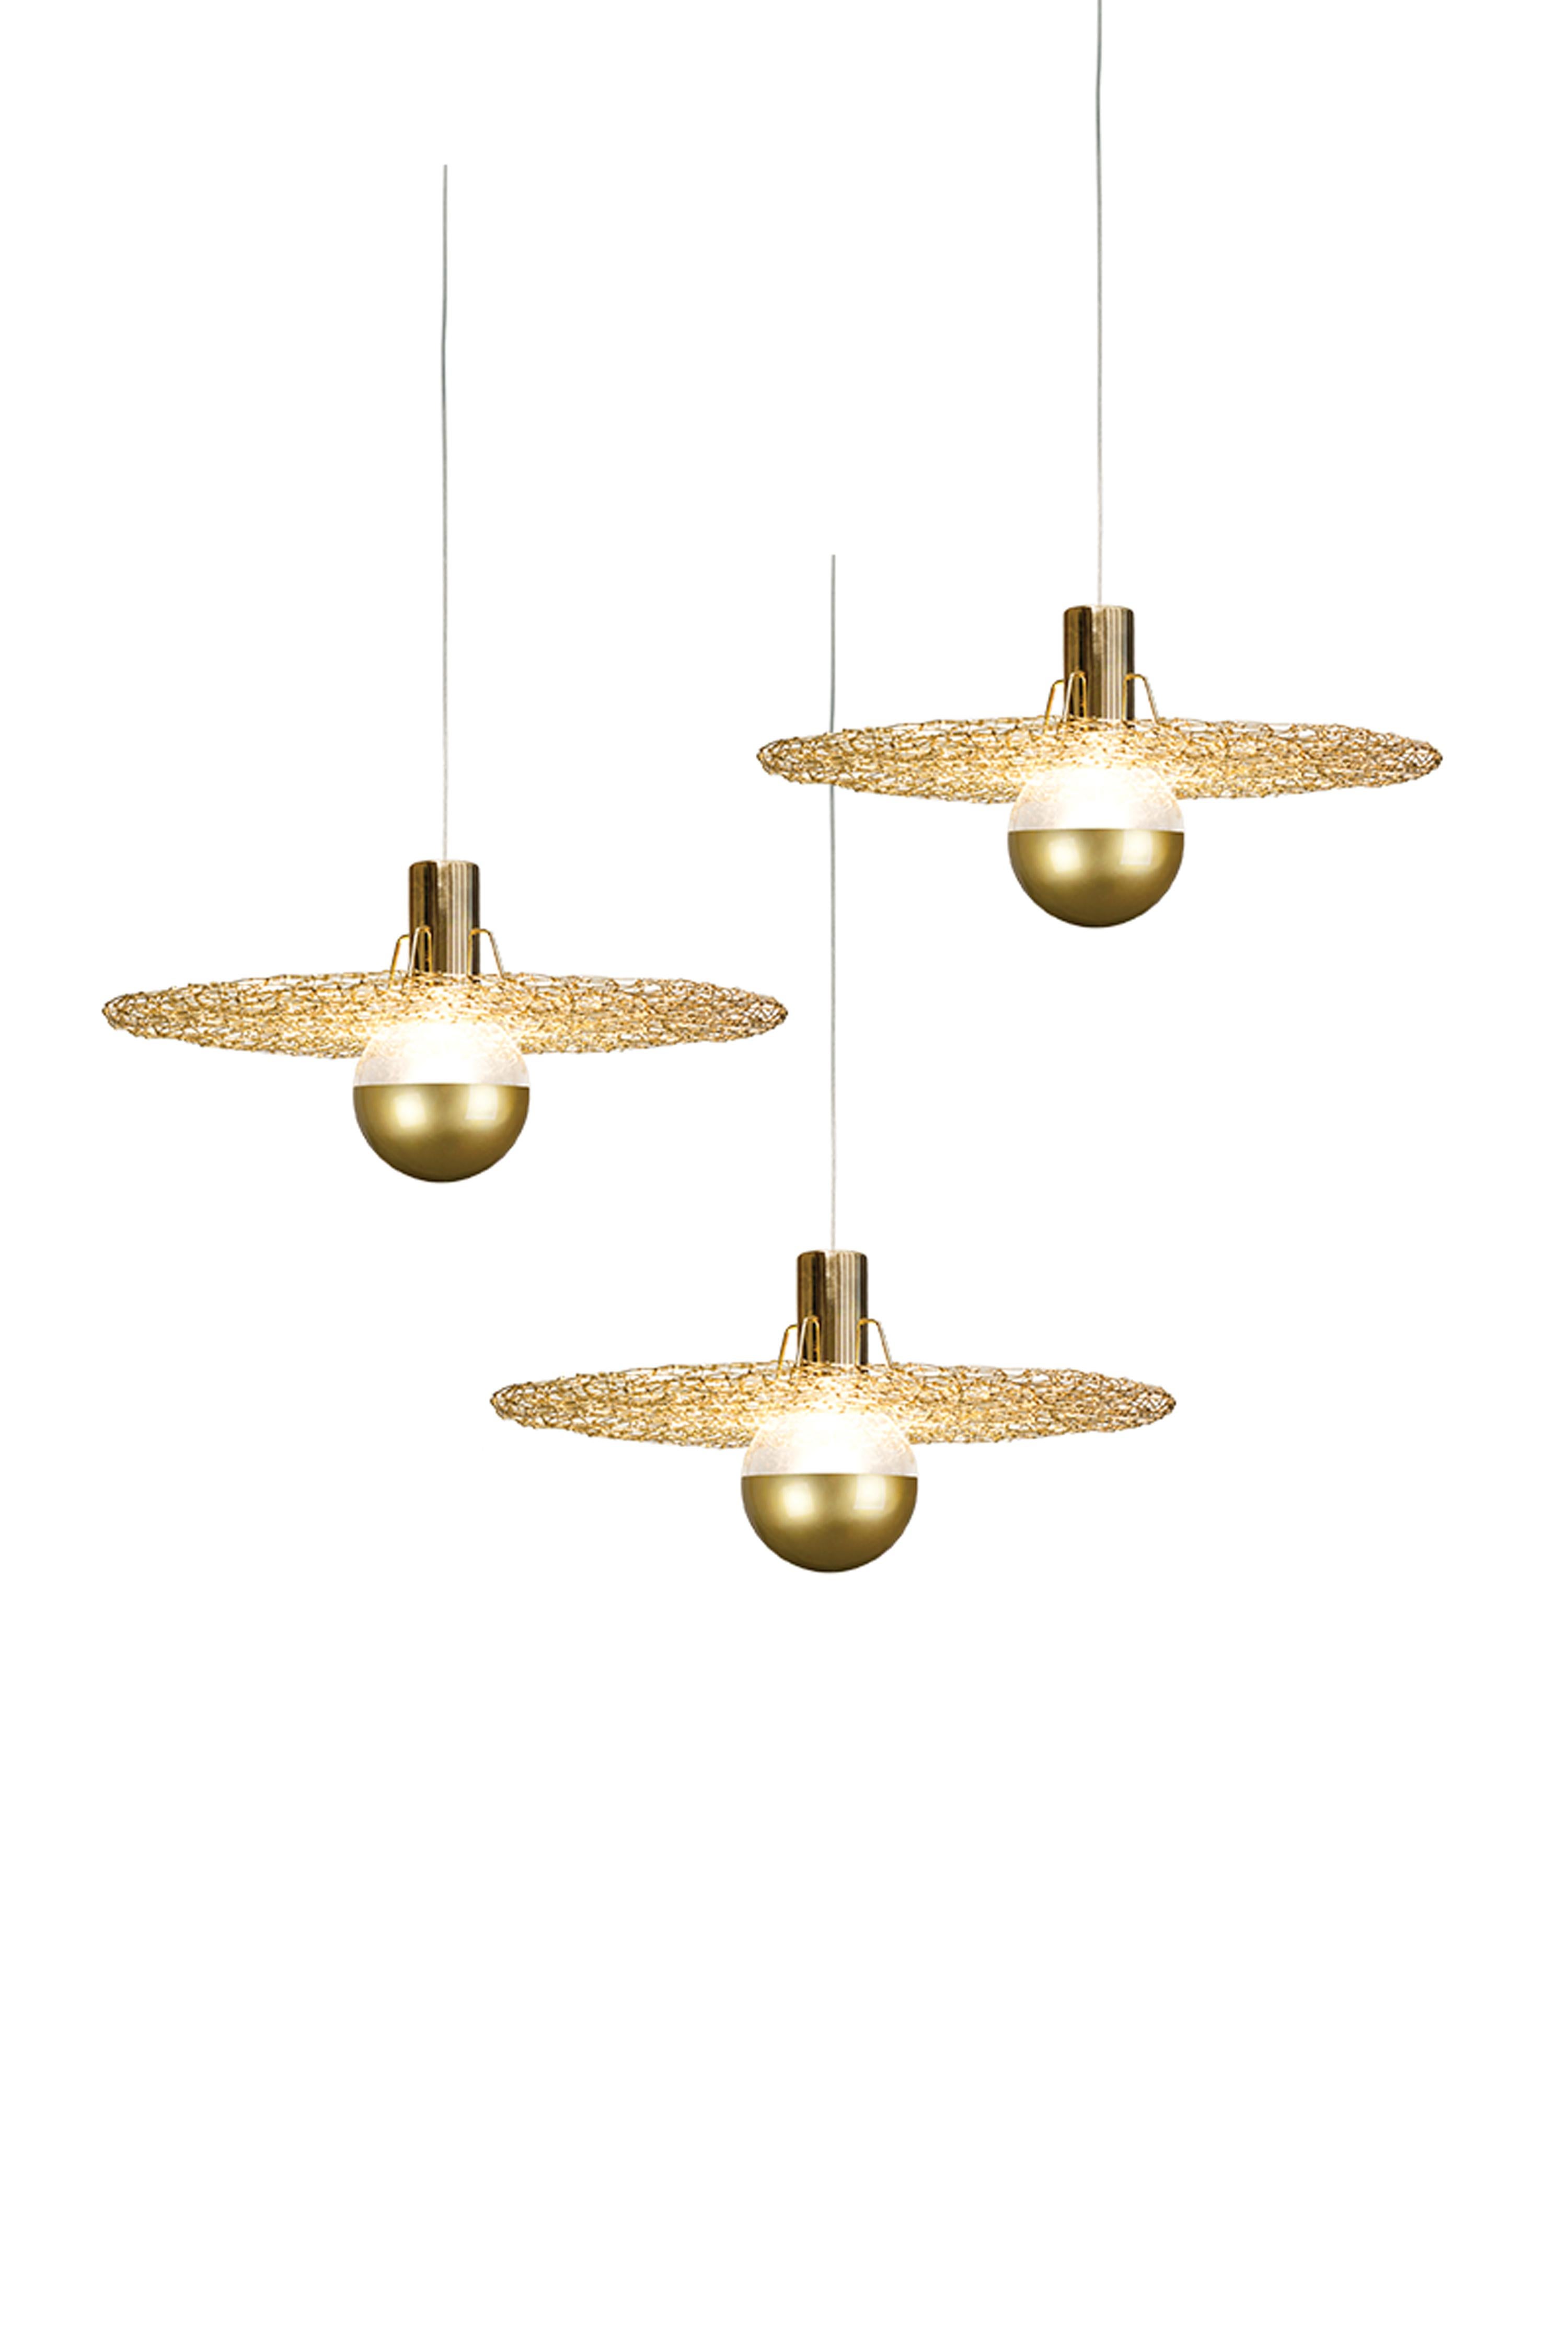 Ango brings its unique hand crafted technique to create a sophisticated ceiling light “Auroral” that captures the beautiful vibes of jewellery suspended within space.

Evocative of an incredible aura of warm light, the new Auroral pendant casts